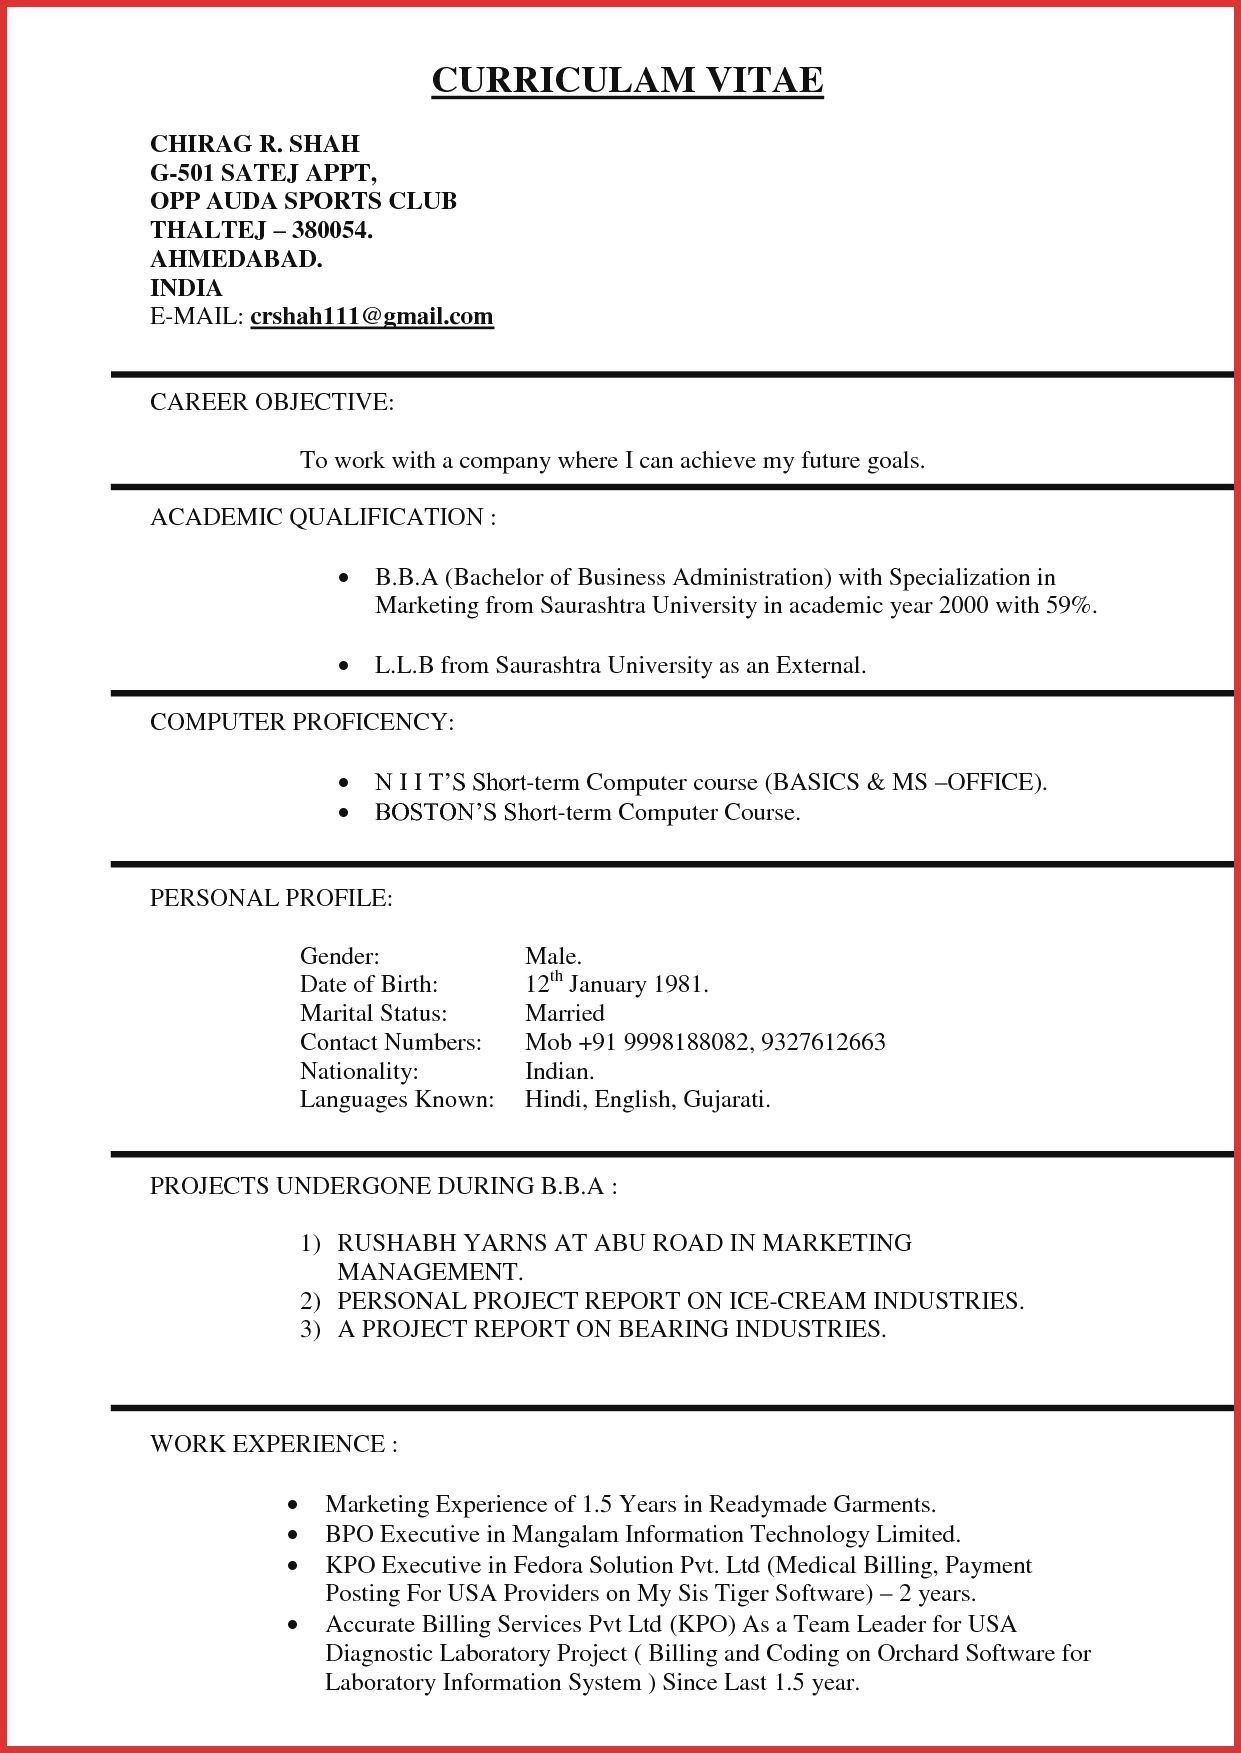 Resume Samples for Experienced Kpo Professionals Resume format Kpo – Resume Templates Job Resume format …